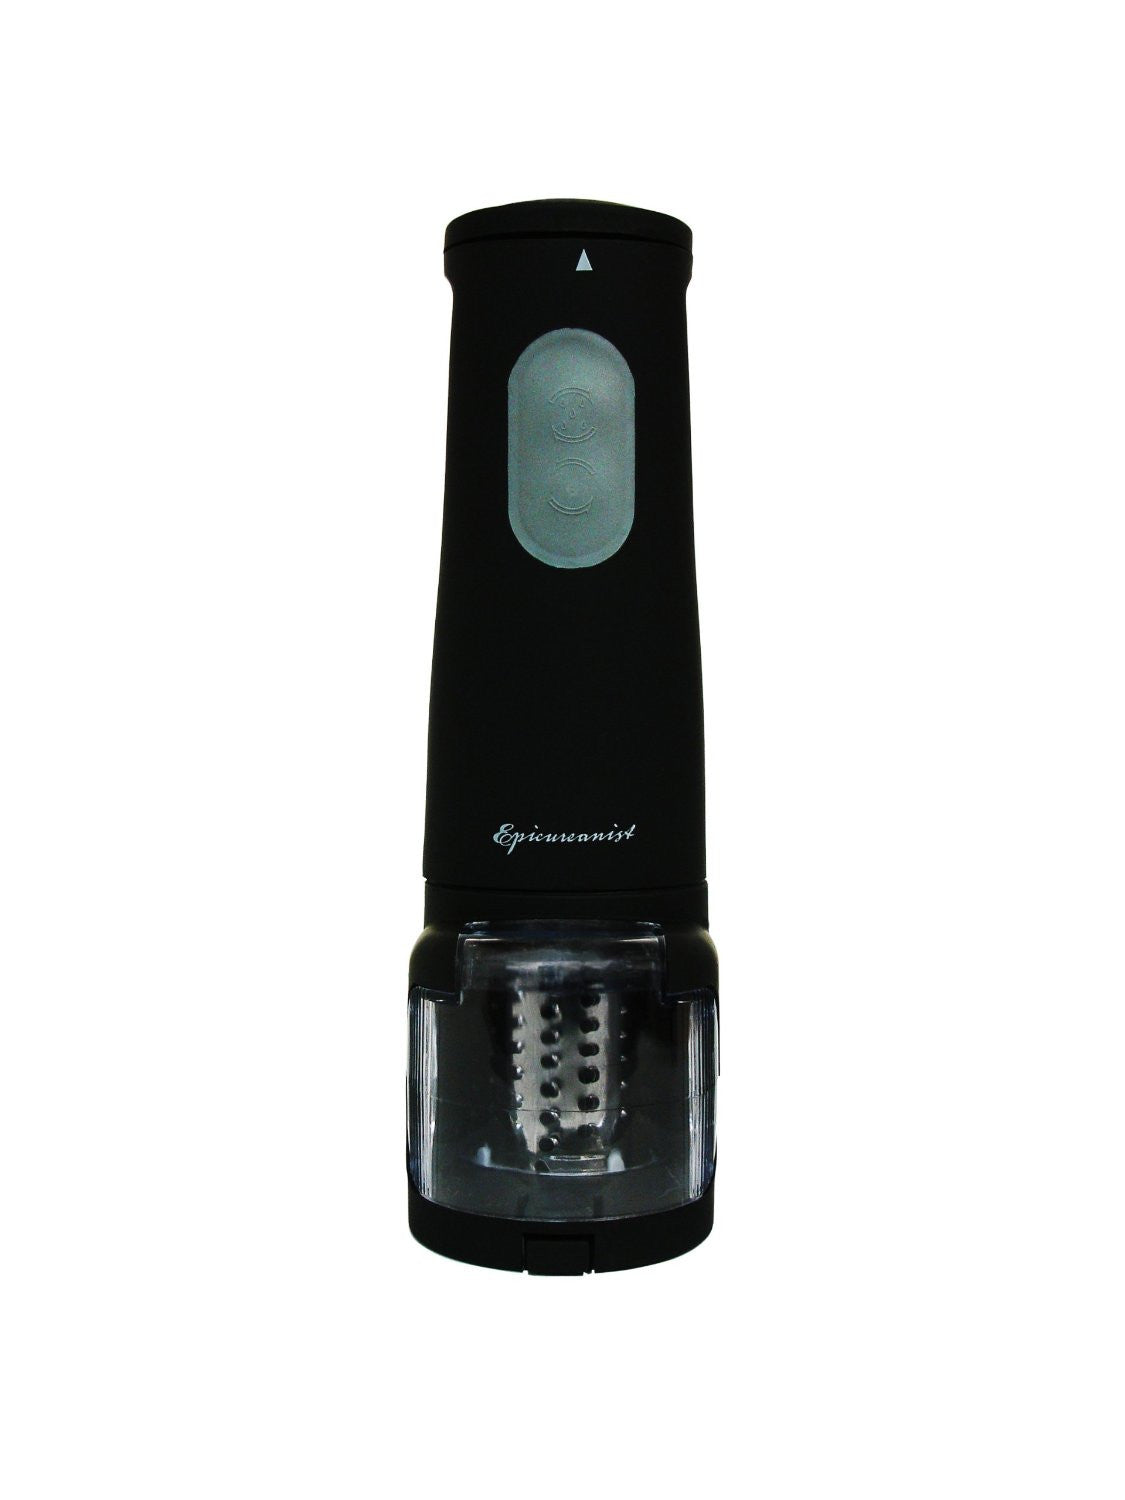 Epicureanist Ep-chgrate1 Electronic Cheese Grater